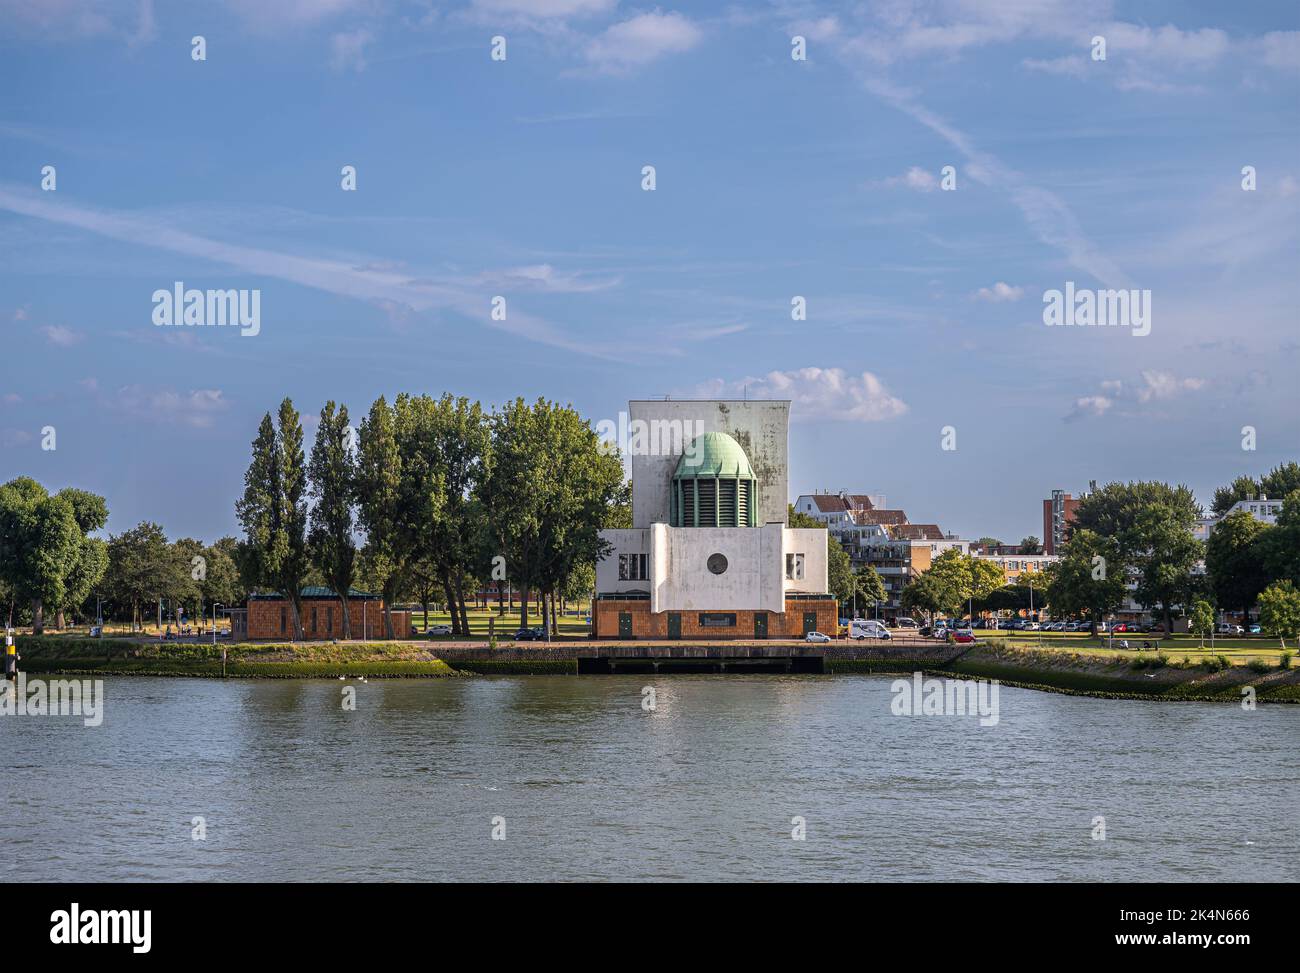 Rotterdam, Netherlands - July 11, 2022: Maastunnel, passage, air ventilation builidng in green setting on shoreline of New Meuse River under which car Stock Photo